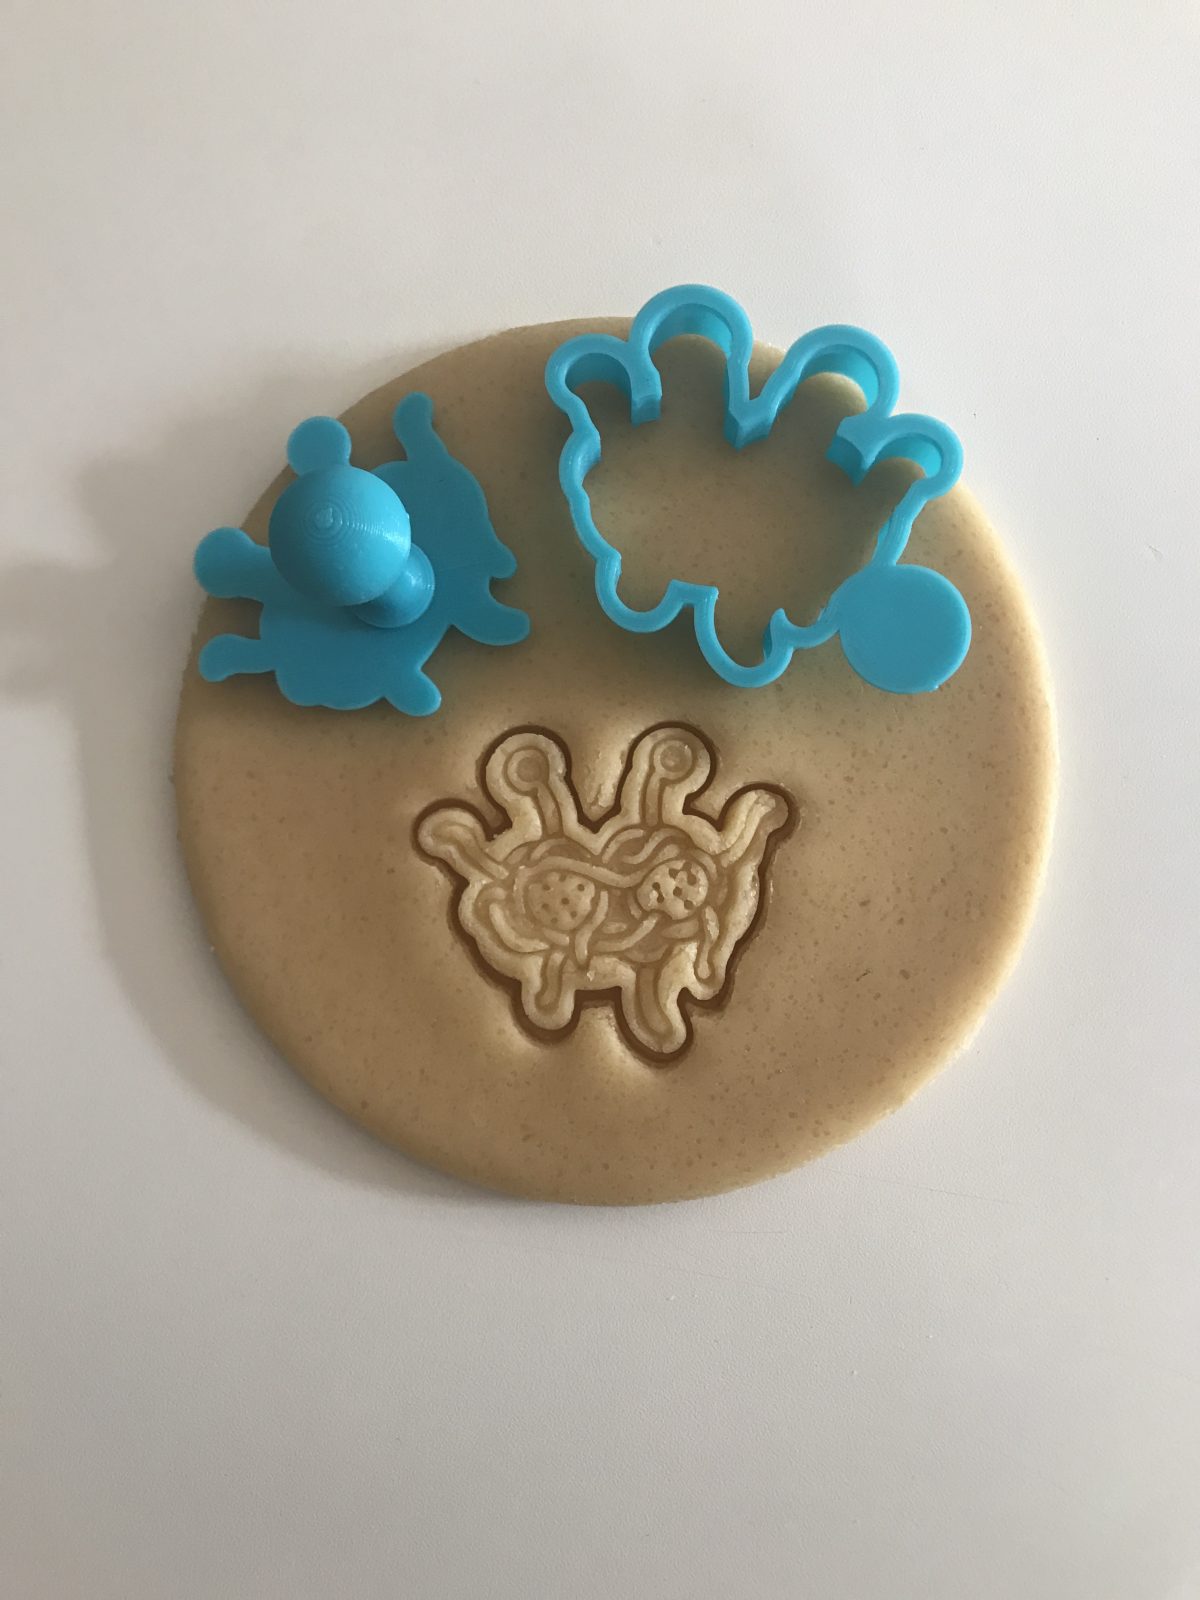 The Flying Spaghetti Monster Mini Cookie Cutter